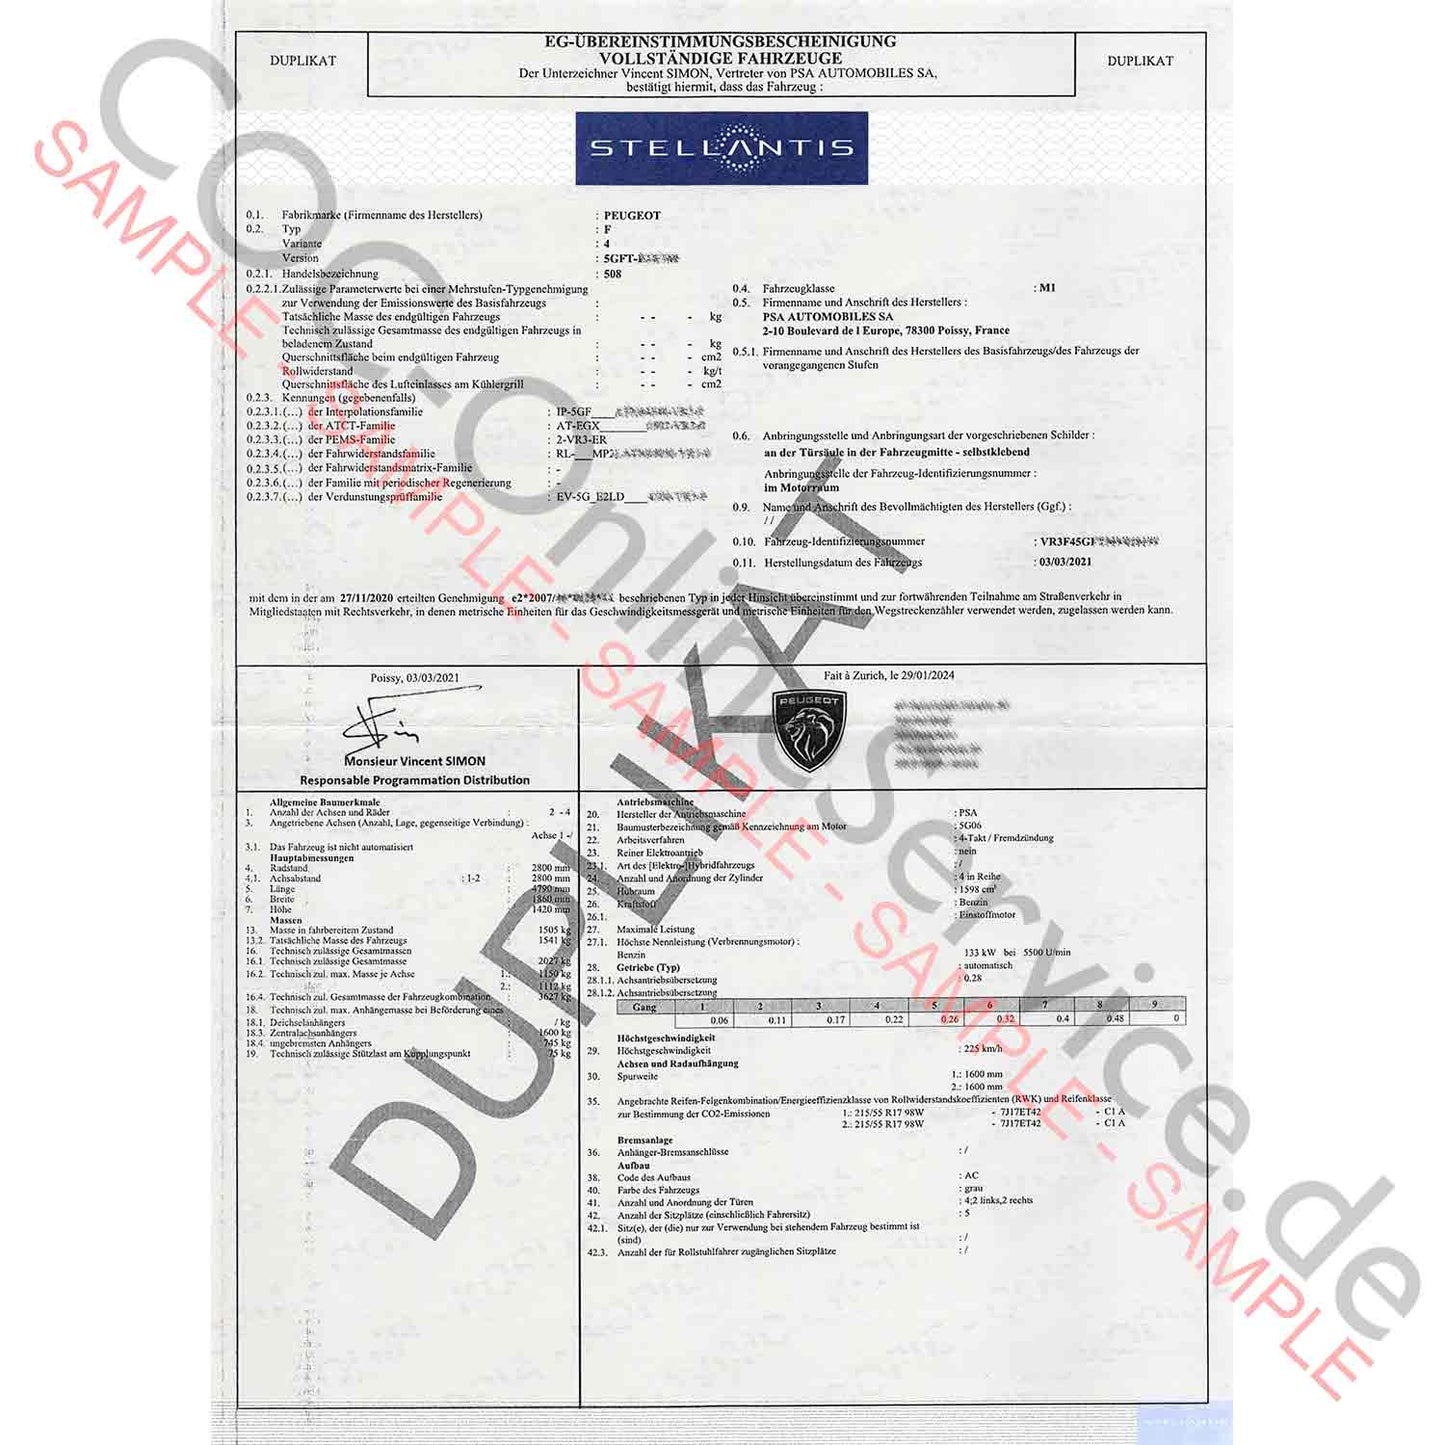 COC papers for Peugeot (Certificate of Conformity)